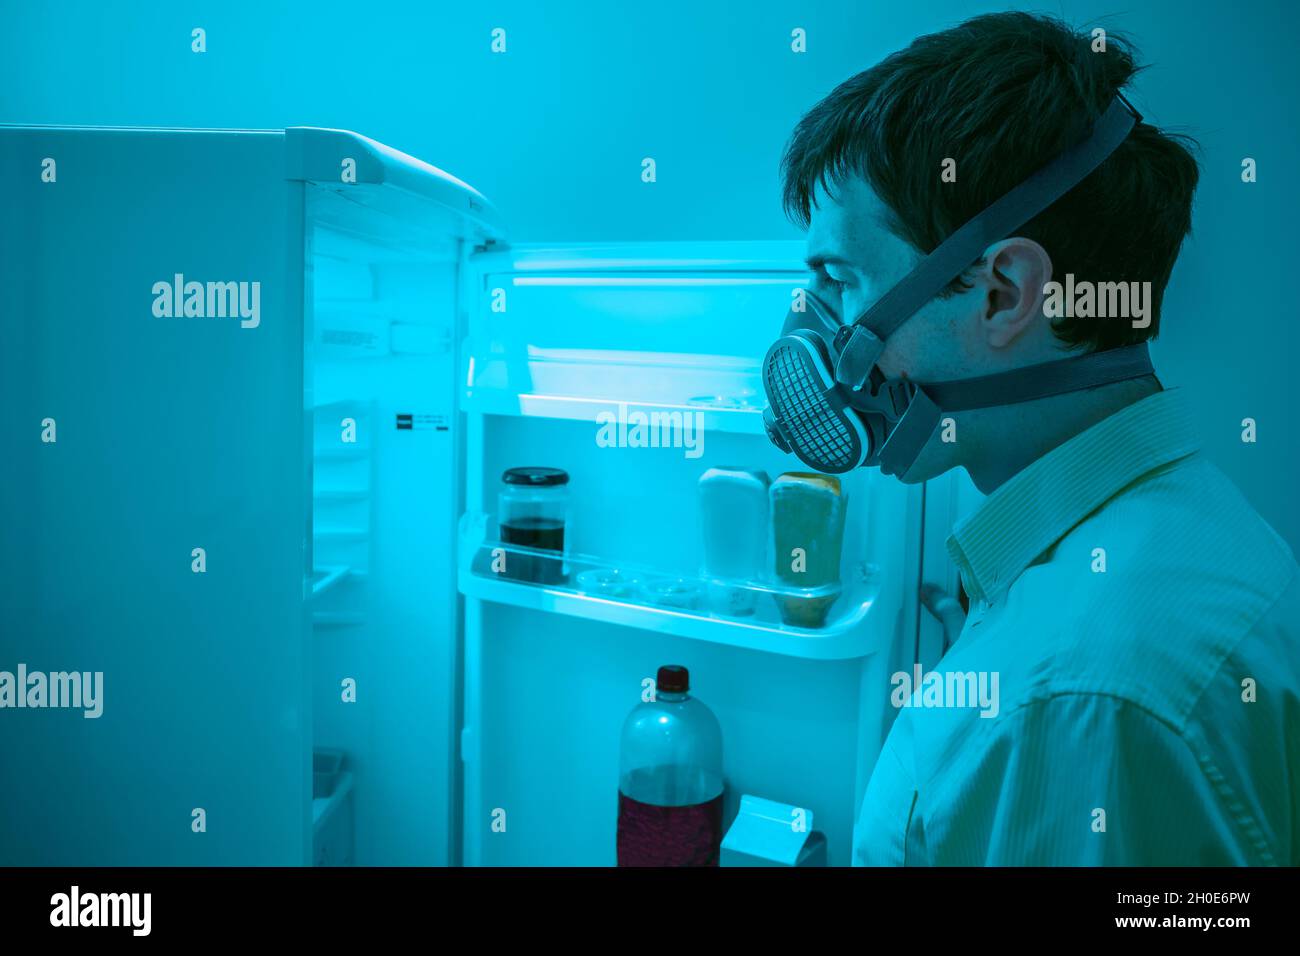 A man wearing an air filtration mask opens a refridgerator door. Perhaps he is concerned about what he may find inside. Stock Photo